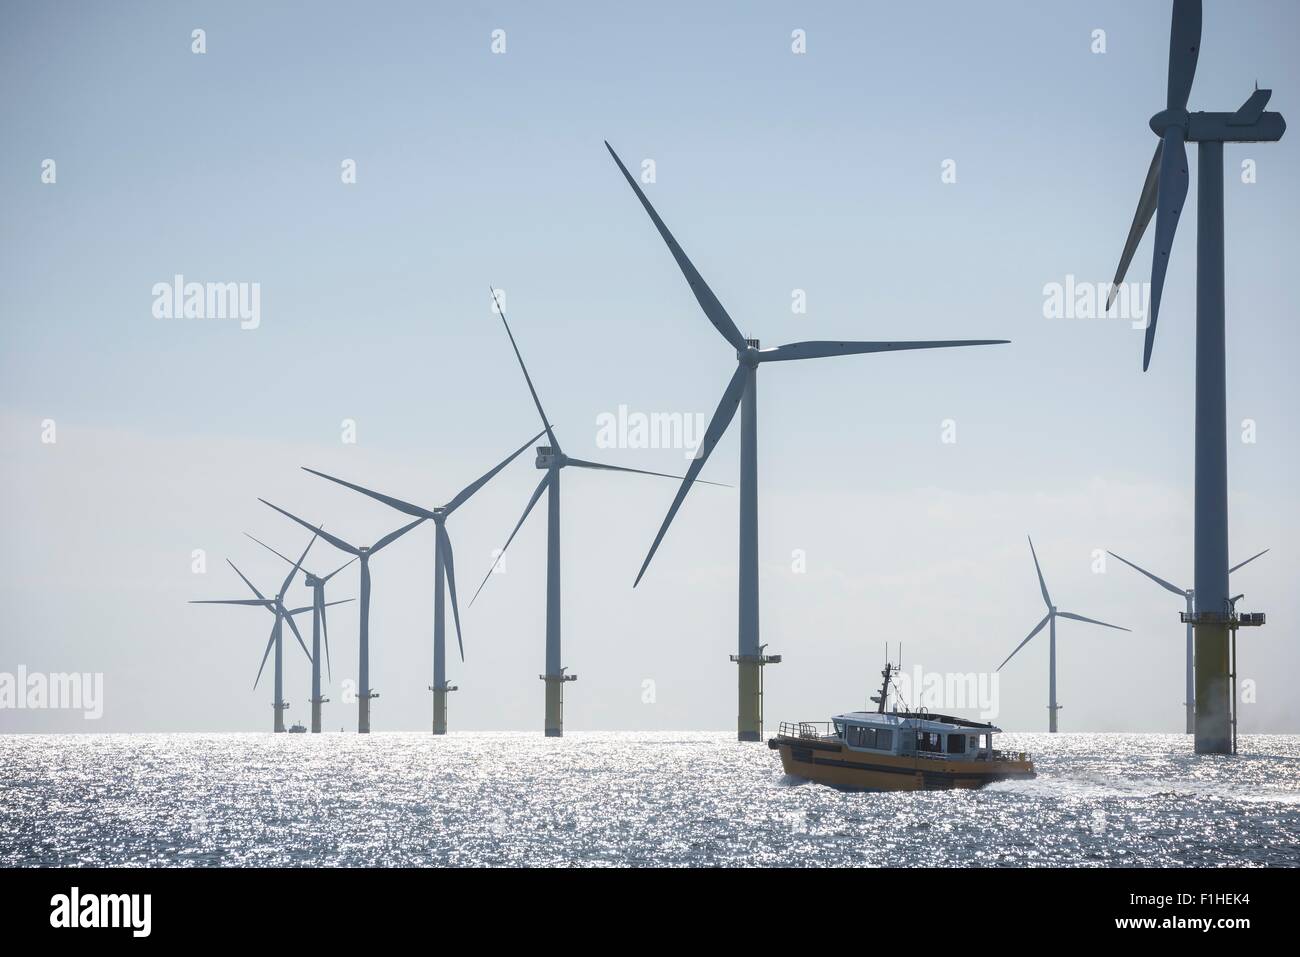 View of service boat at offshore windfarm Stock Photo